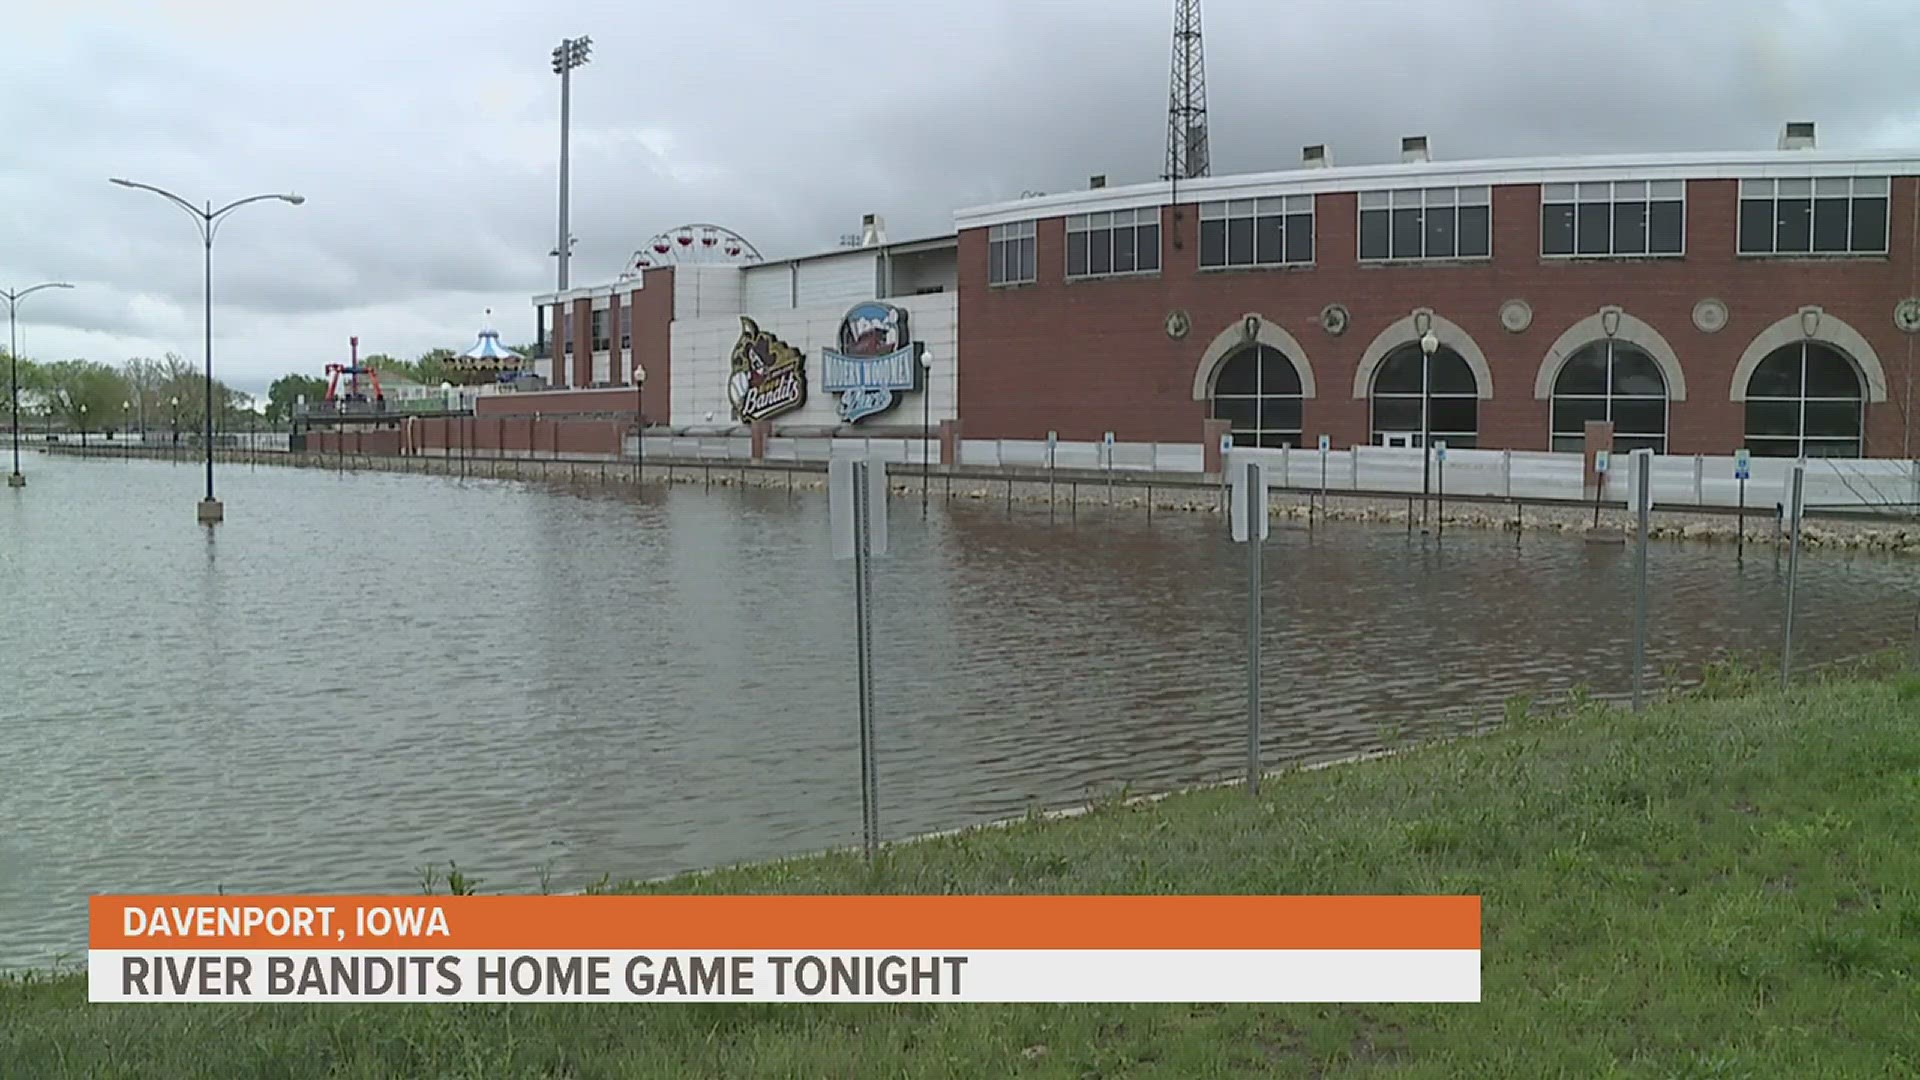 River Bandits owner Dave Heller says the team is extremely lucky they were on the road while the Mississippi River at Rock Island reached its highest point.